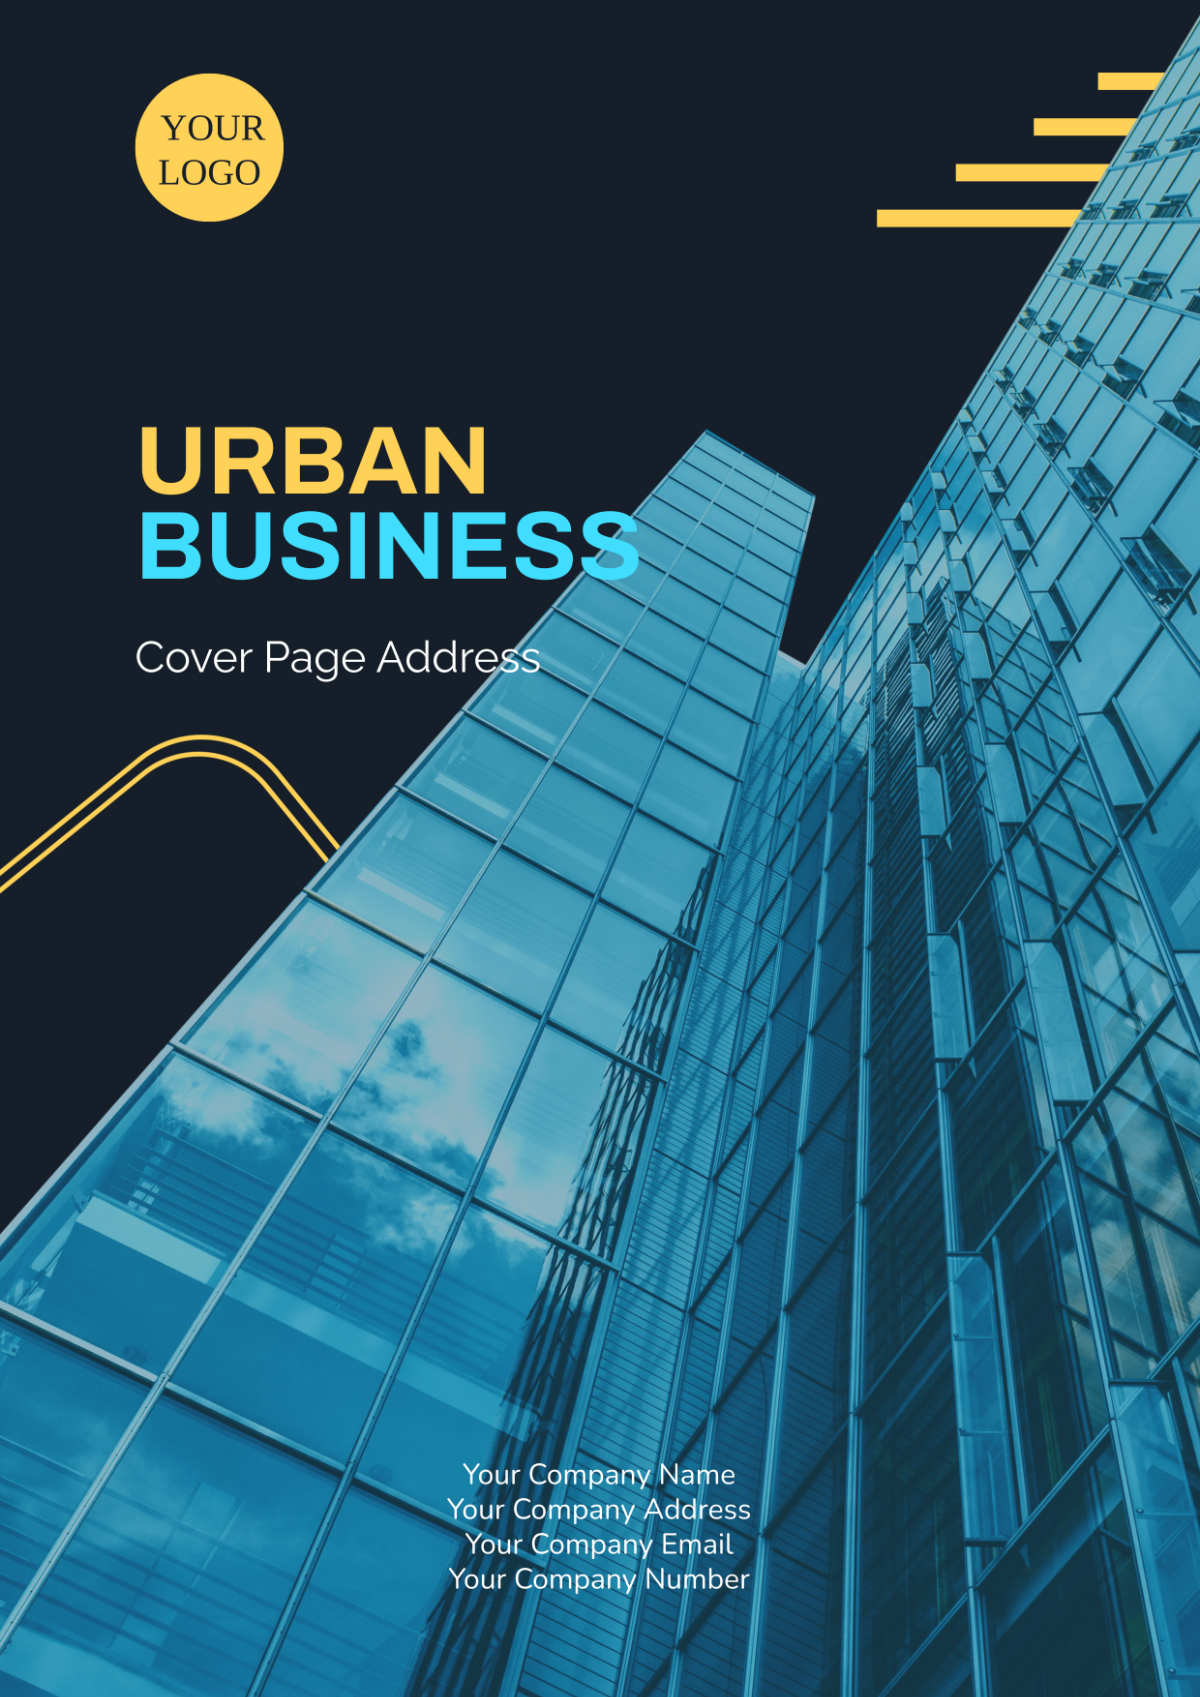 Urban Business Cover Page Address